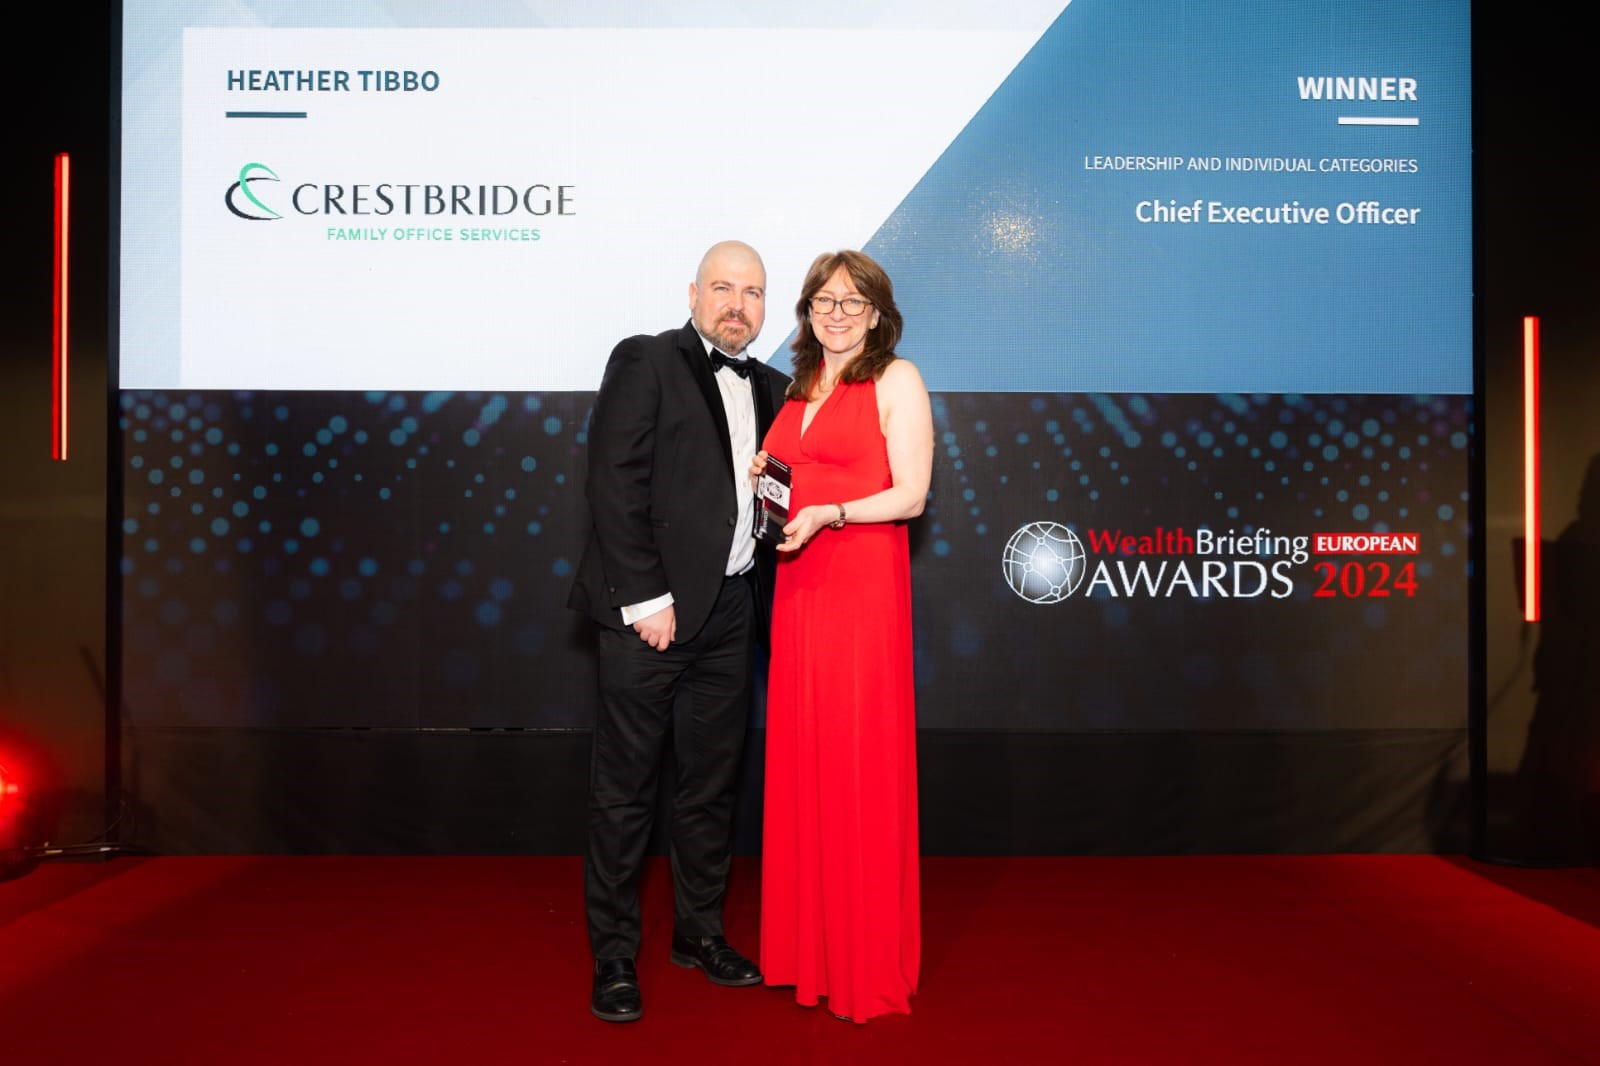 Double success for Crestbridge Family Office Services at Wealthbriefing European Awards